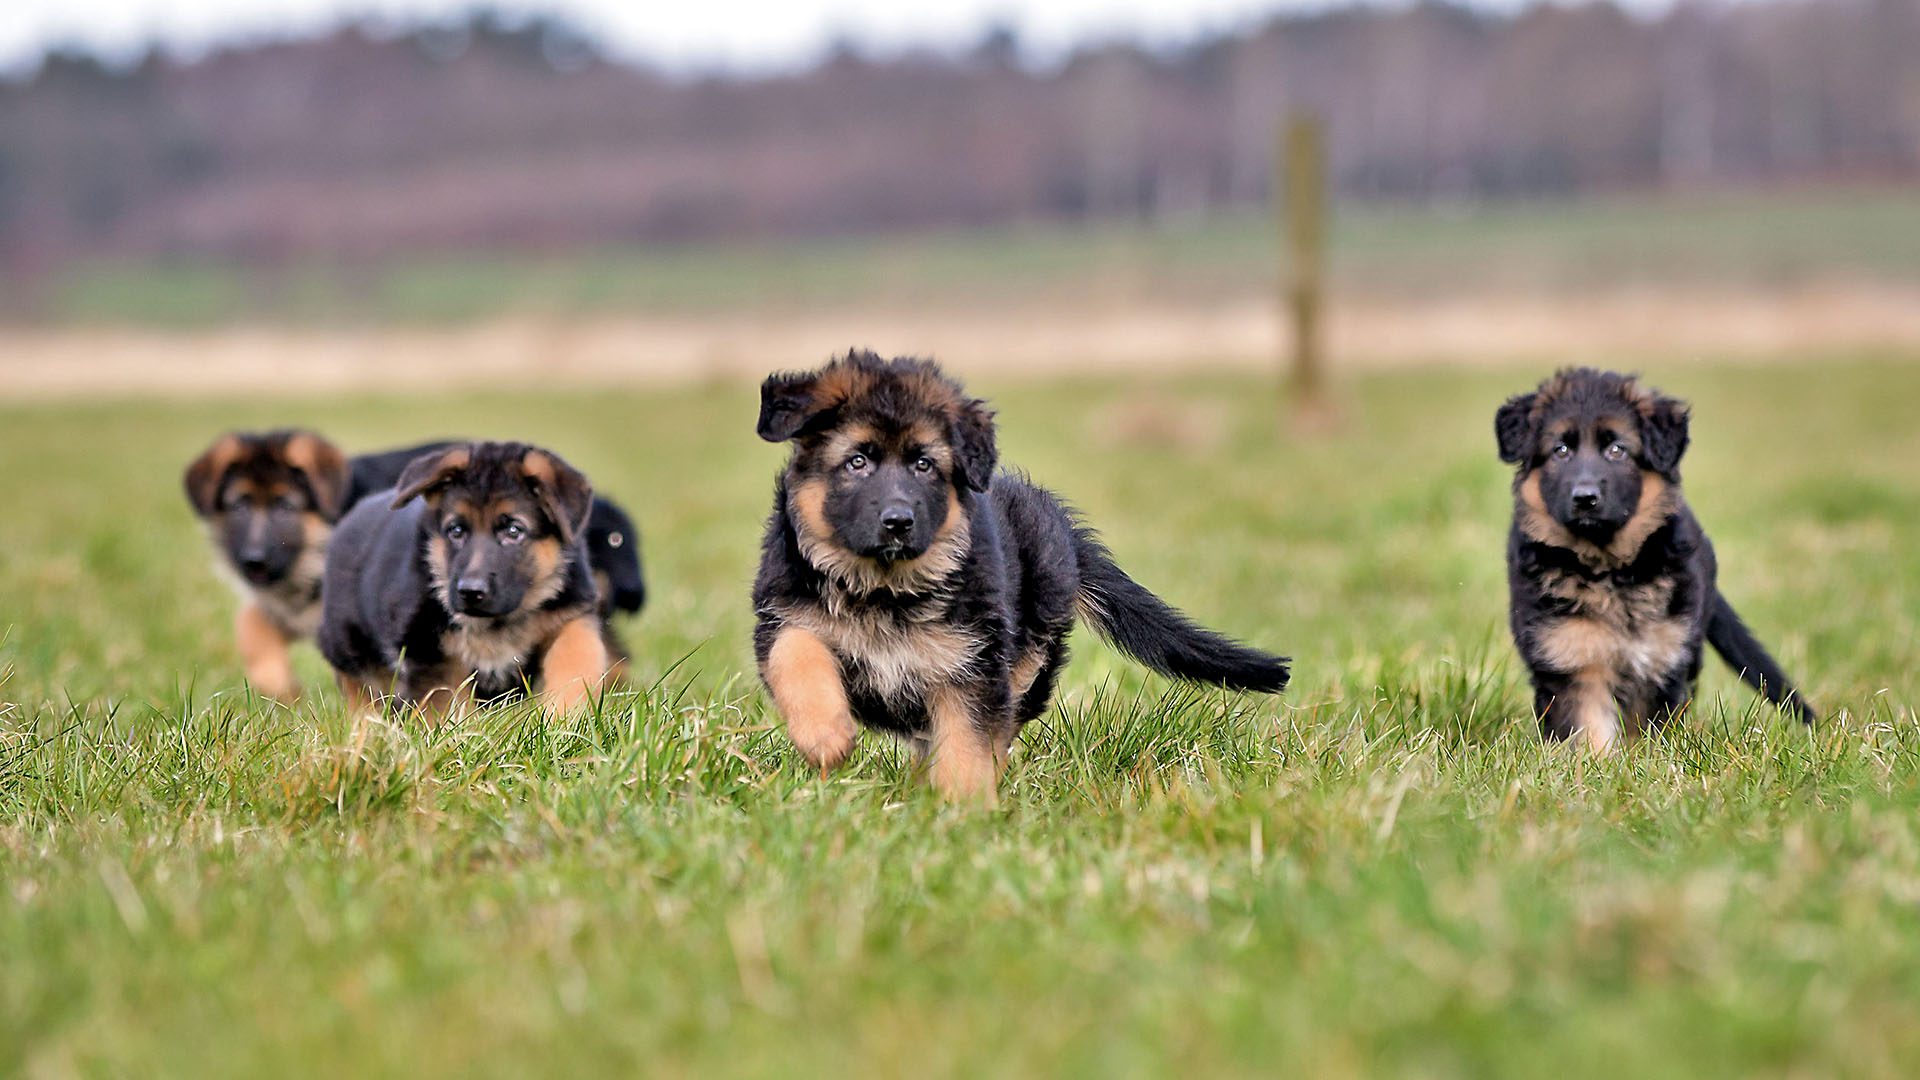 Stock photo of Three purebred young German Shepherd dog puppies having fun outdoors on a grass field on a sunny spring day.